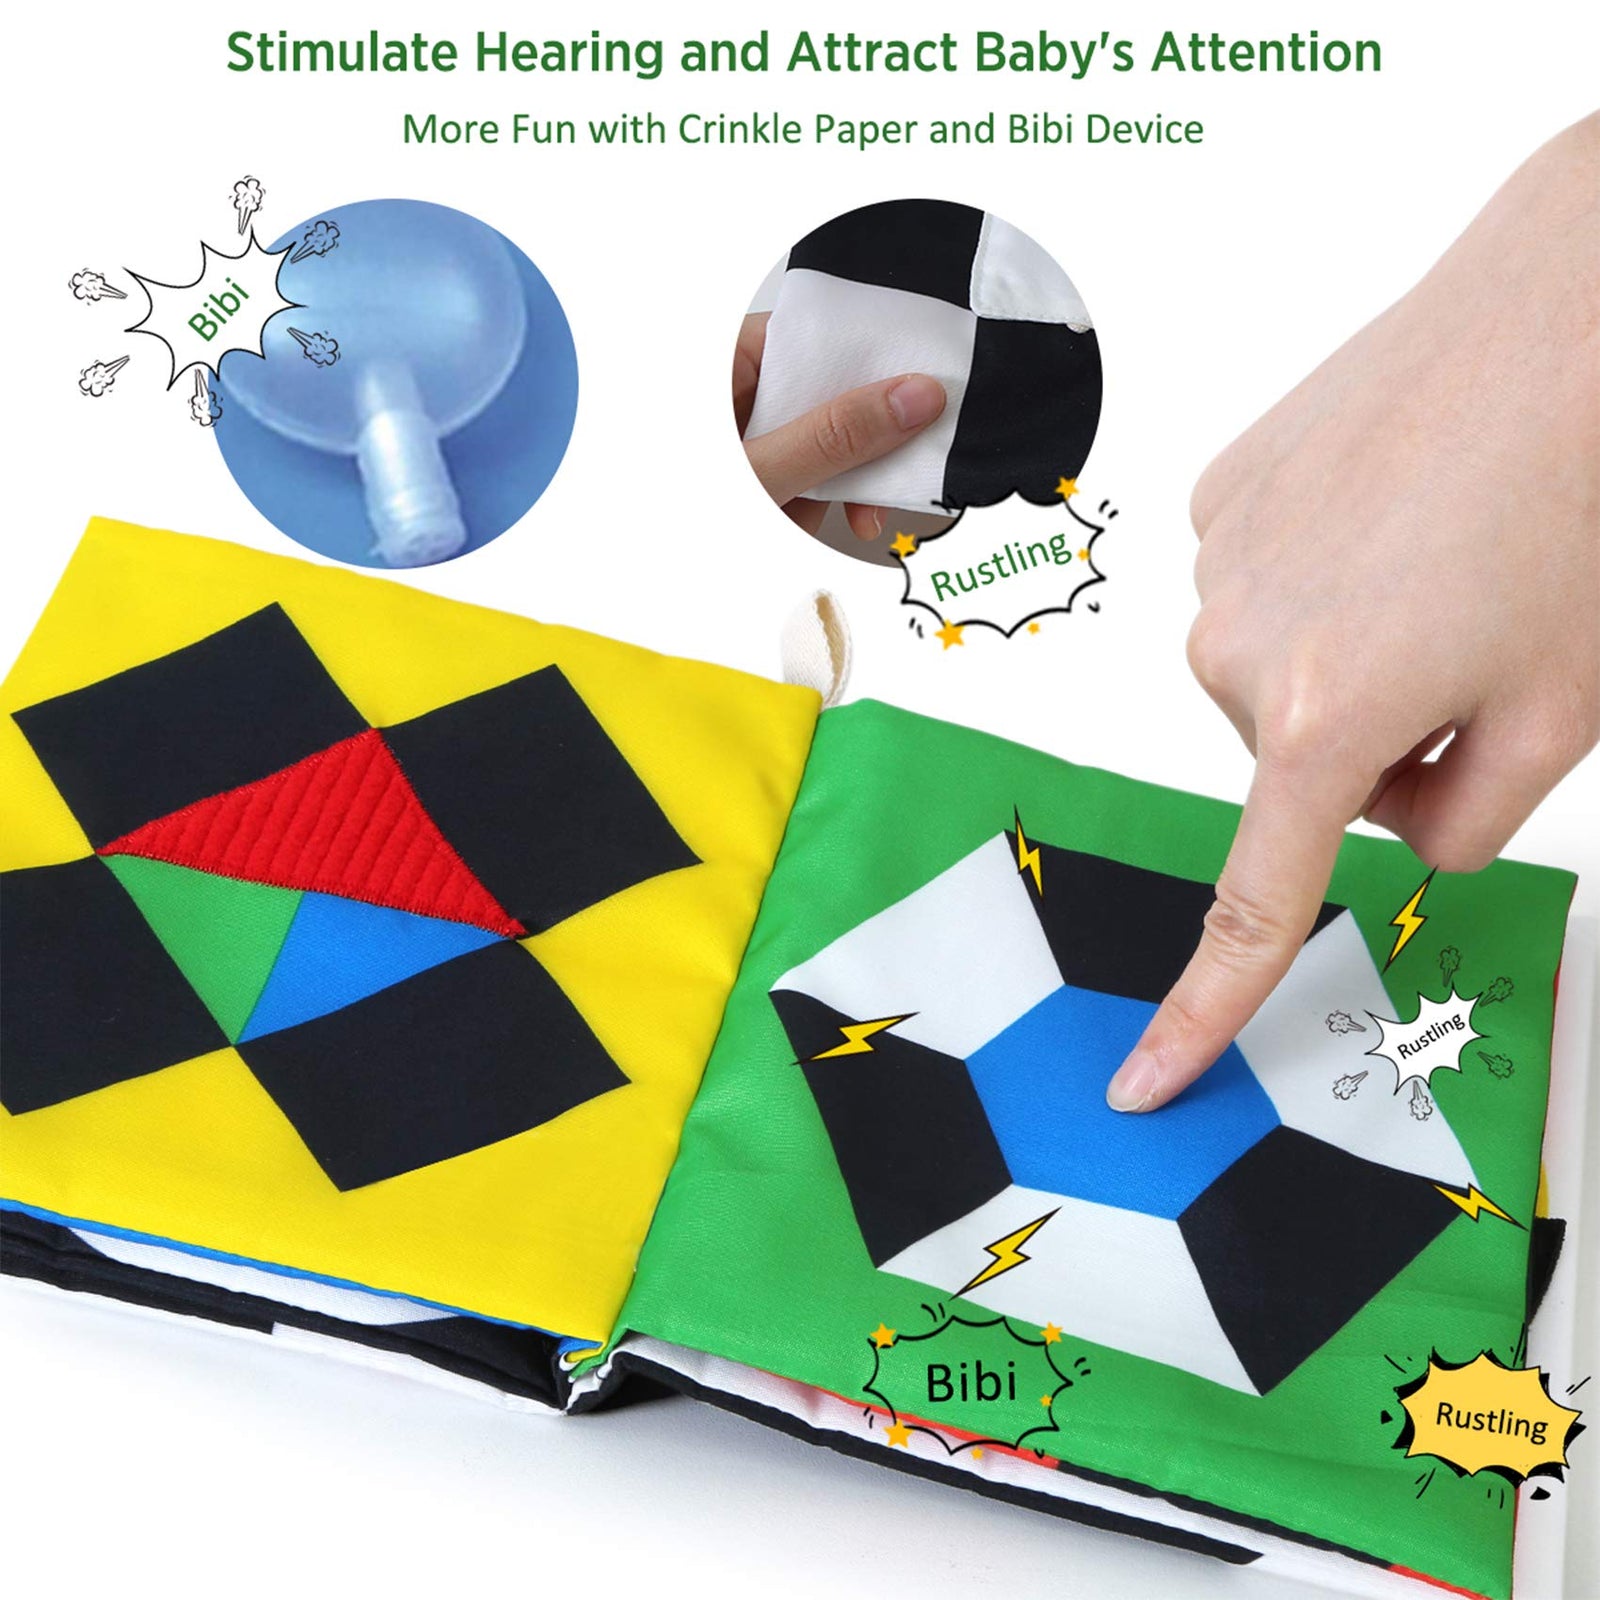 beiens Soft Baby Books, High Contrast Black and White Books Non Toxic Fabric Touch and Feel Crinkle Cloth Books Early Educational Stimulation Toys for Infants Toddlers, Baby Gift Stroller Toys